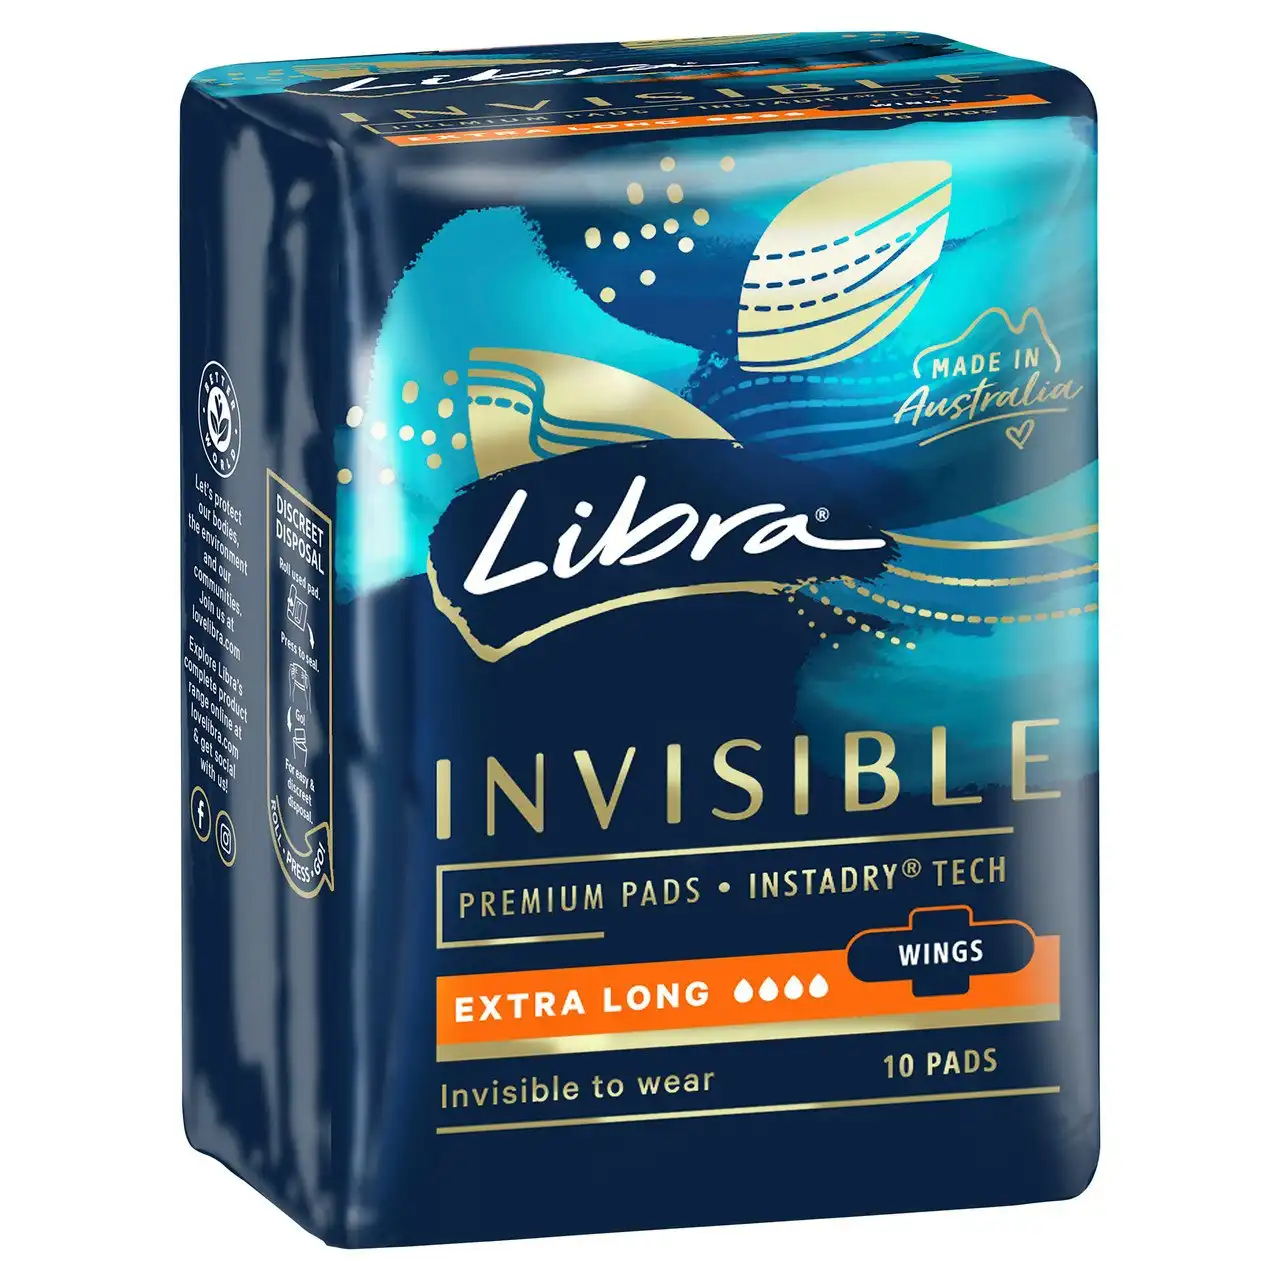 Libra Invisible Pads Goodnights Wings 10 pack